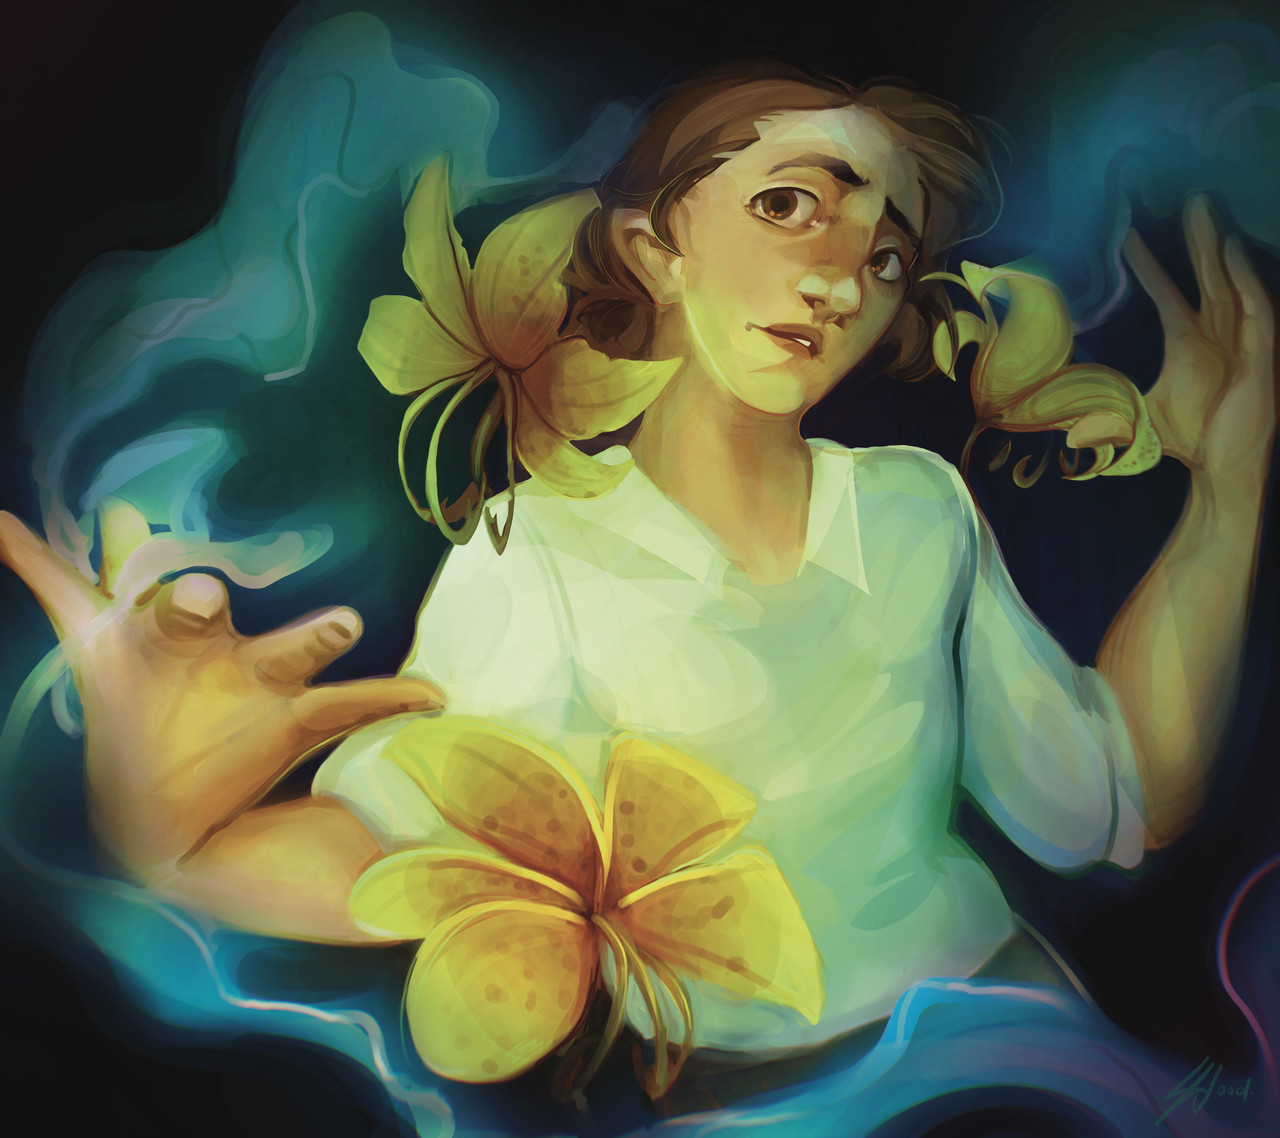 Blue-green smoky light and yellow flowers float around a person with arms outstretched